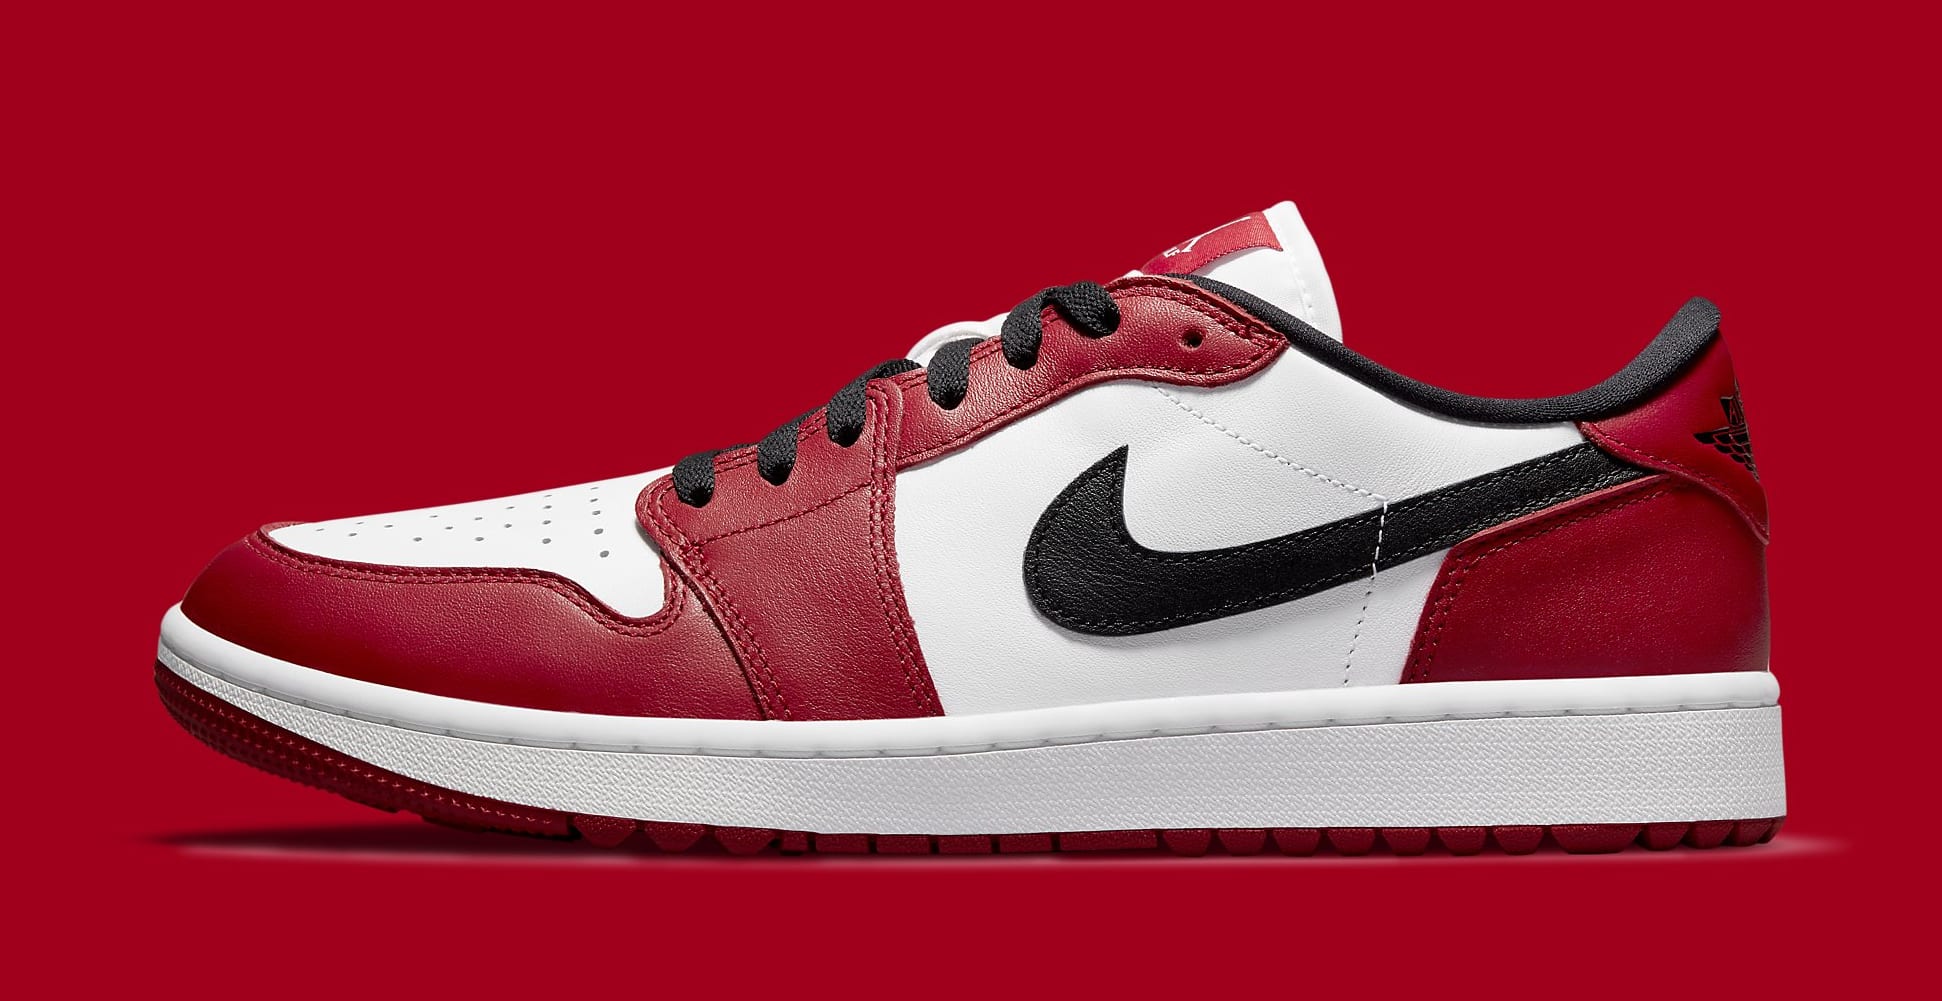 Chicago' Air Jordan 1s Gets Updated For the Golf Course